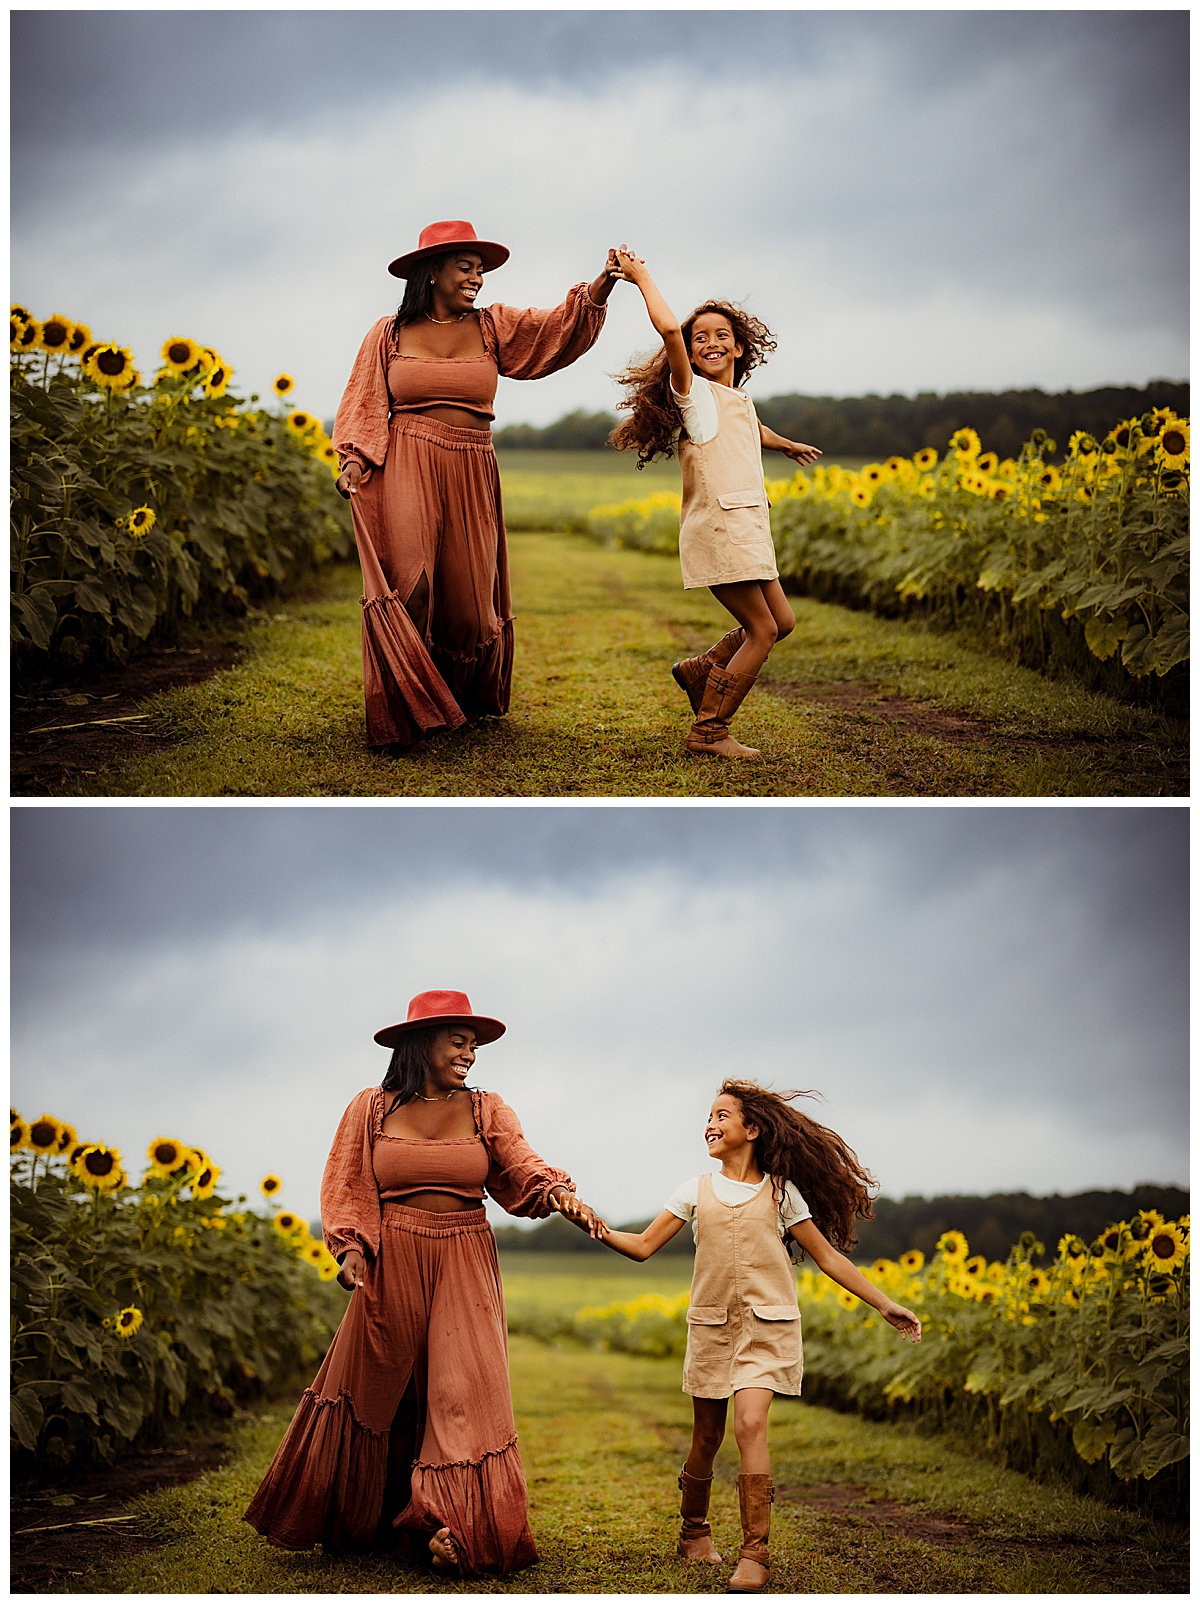 Mom and daughter dance together during their sunflower photoshoot